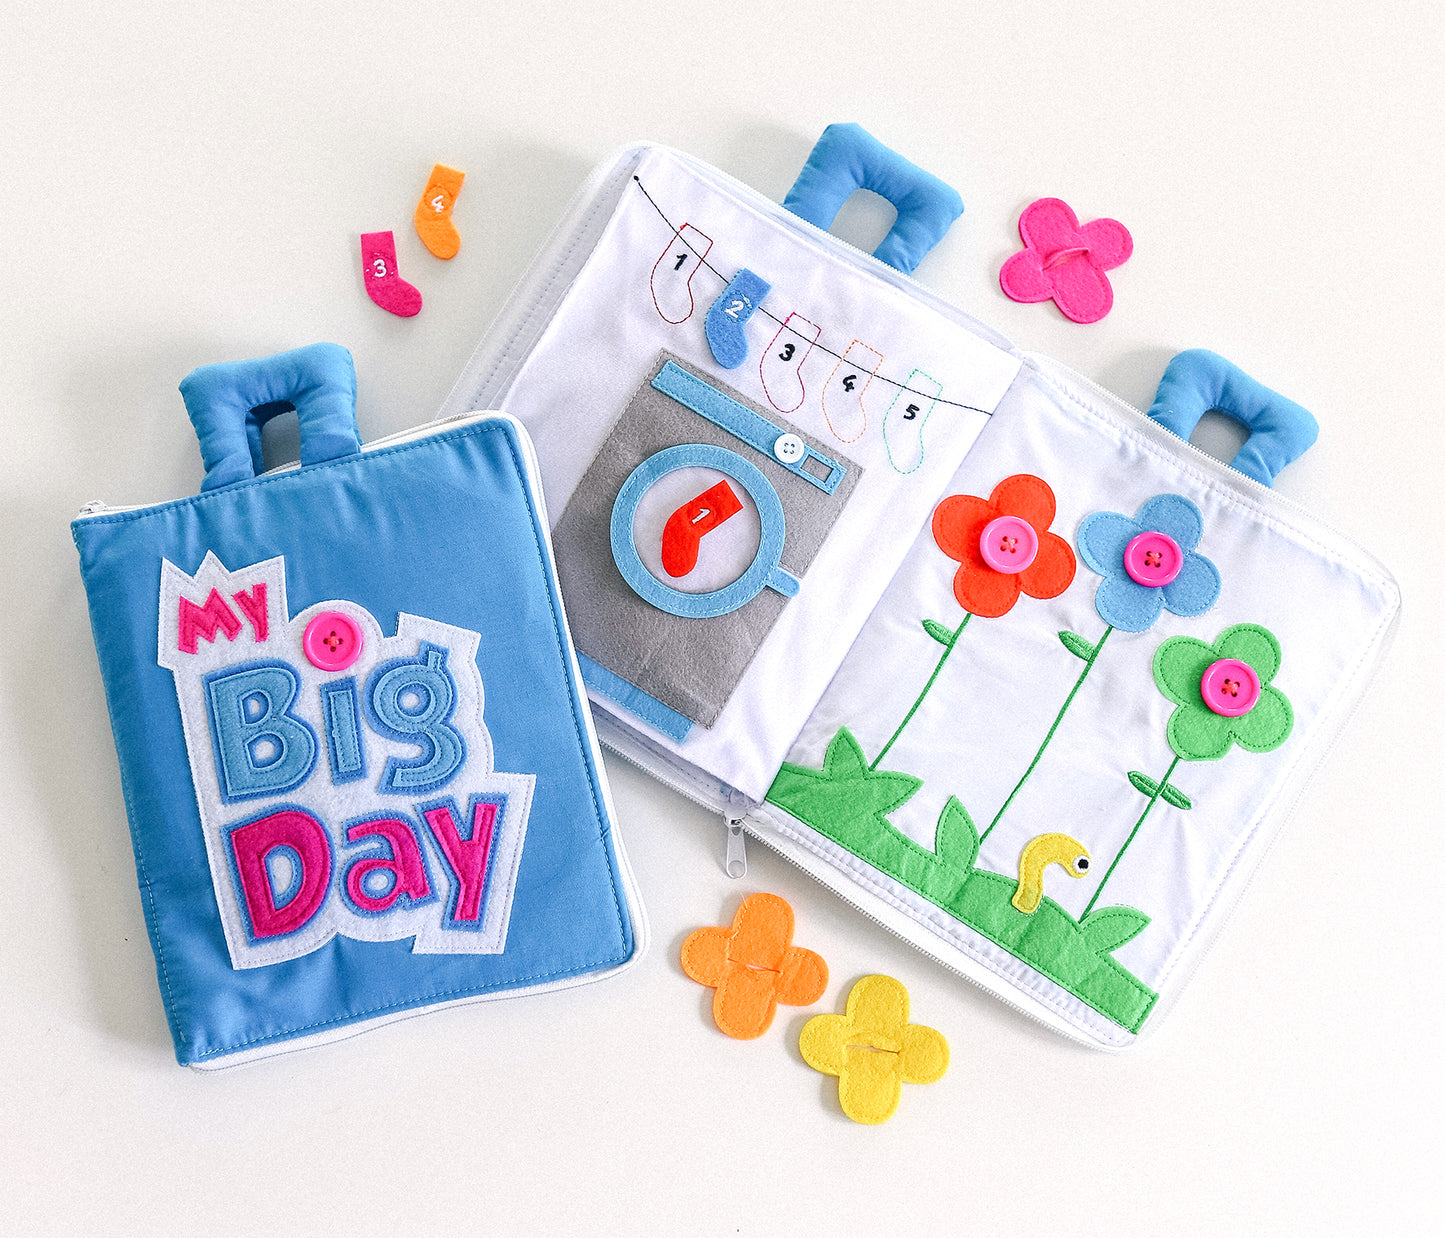 Load image into Gallery viewer, Fabric Activity Book | My Big Day | Blue Cover
